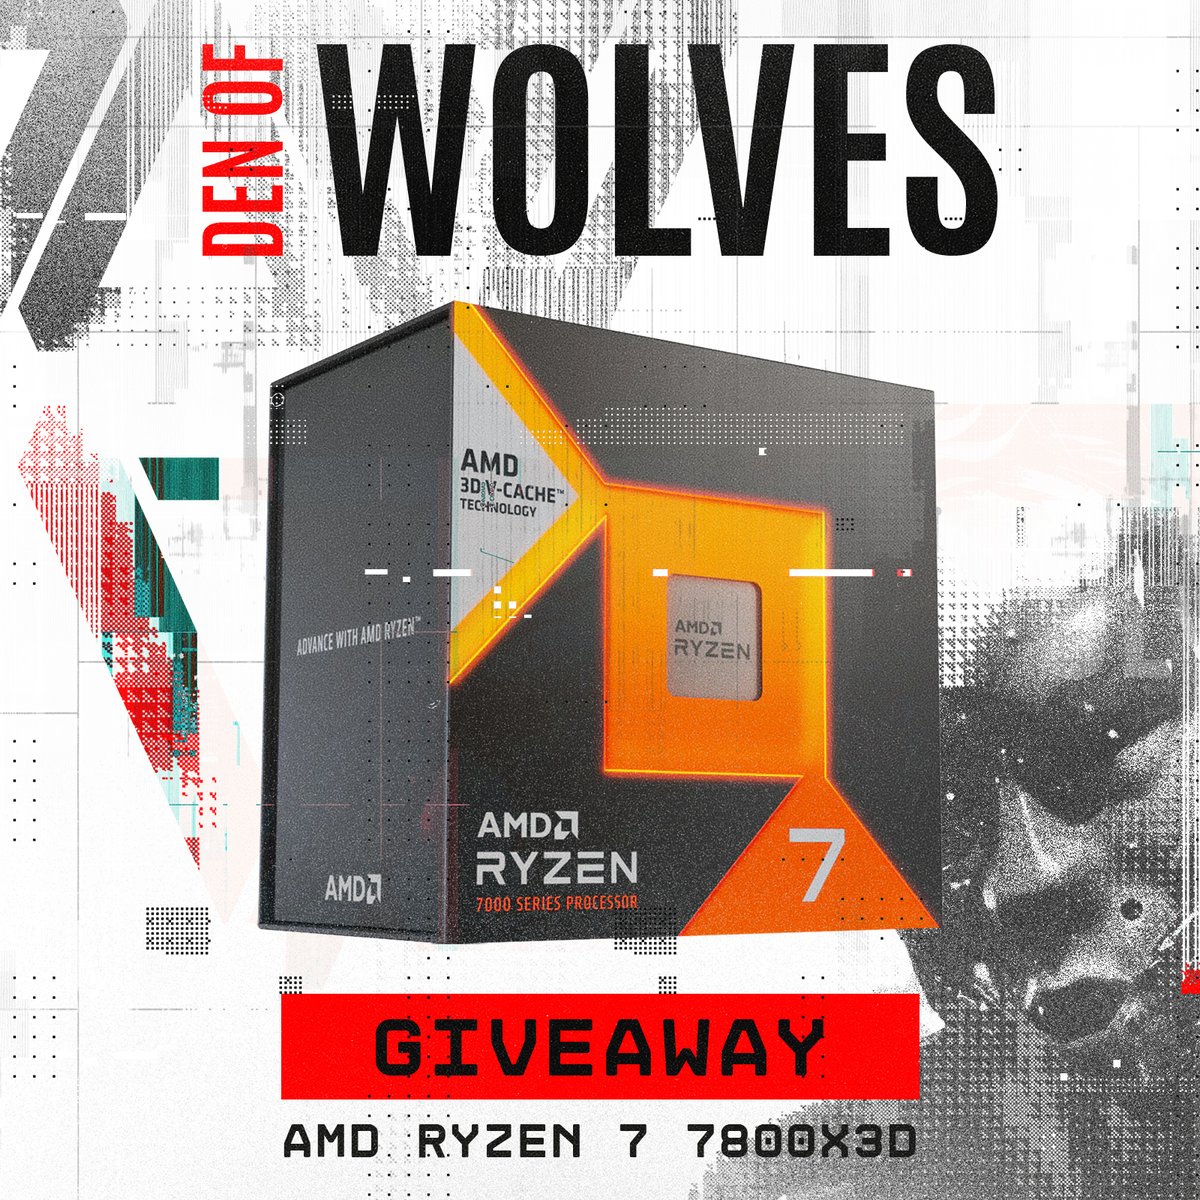 We've partnered with @AMDgaming to give away an AMD Ryzen 7 7800X3D (MSRP $399.00) to one lucky winner. Enter the link below to get a chance to win! Ends Feb 11th, 11:59PM CET ENTER 👉 dow.gg/amd-giveaway #denofwolves #giveaway